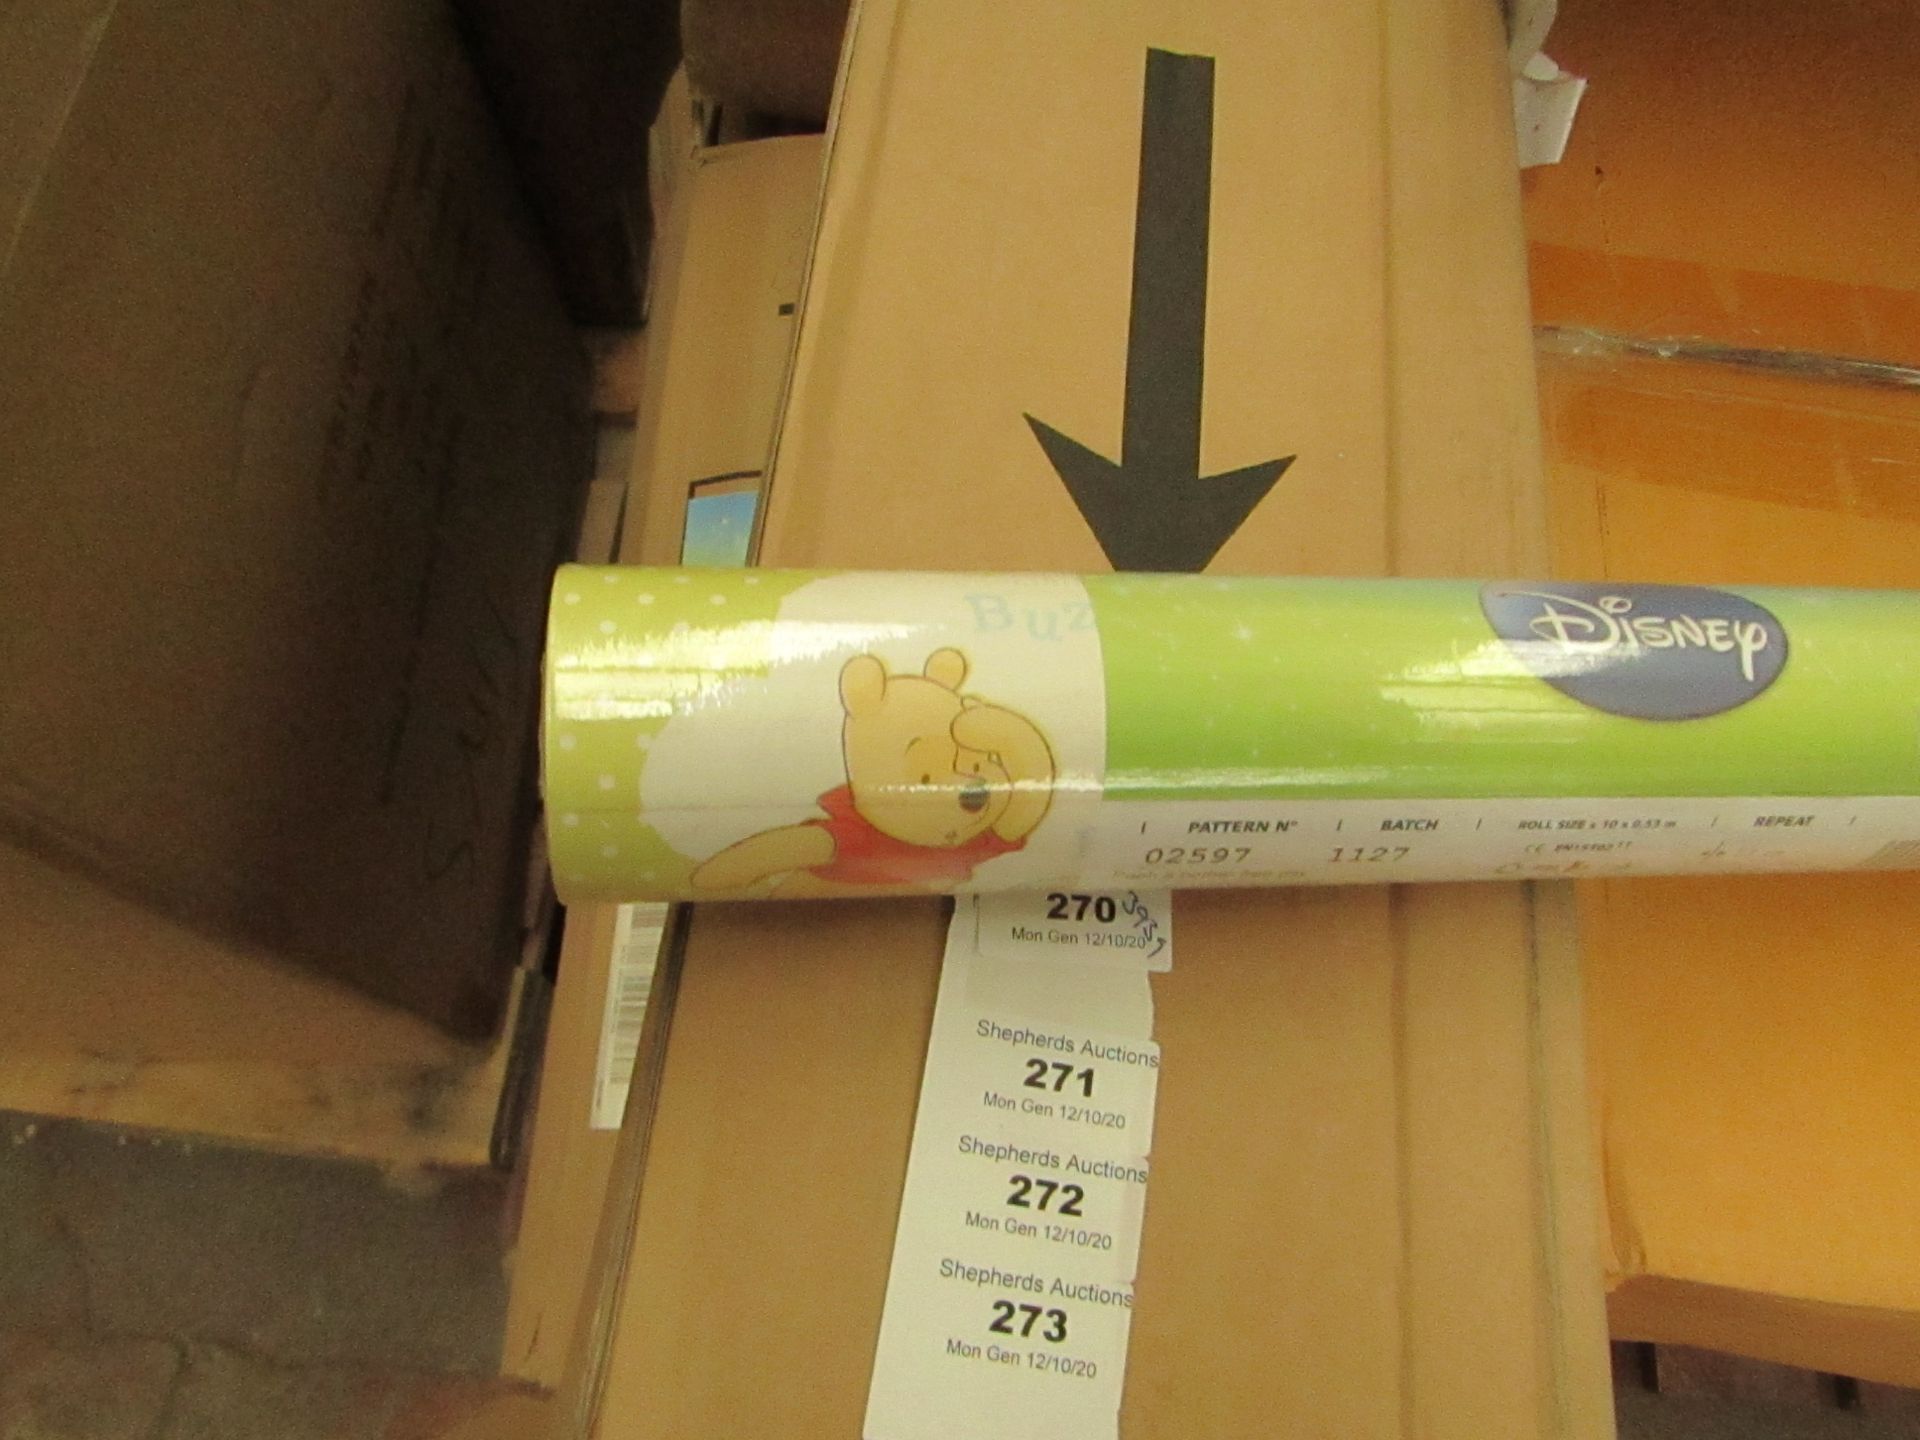 Box of 12x Disney - Winnie The Pooh WallPaper - All Packaged & Boxed. - See Image for Design.